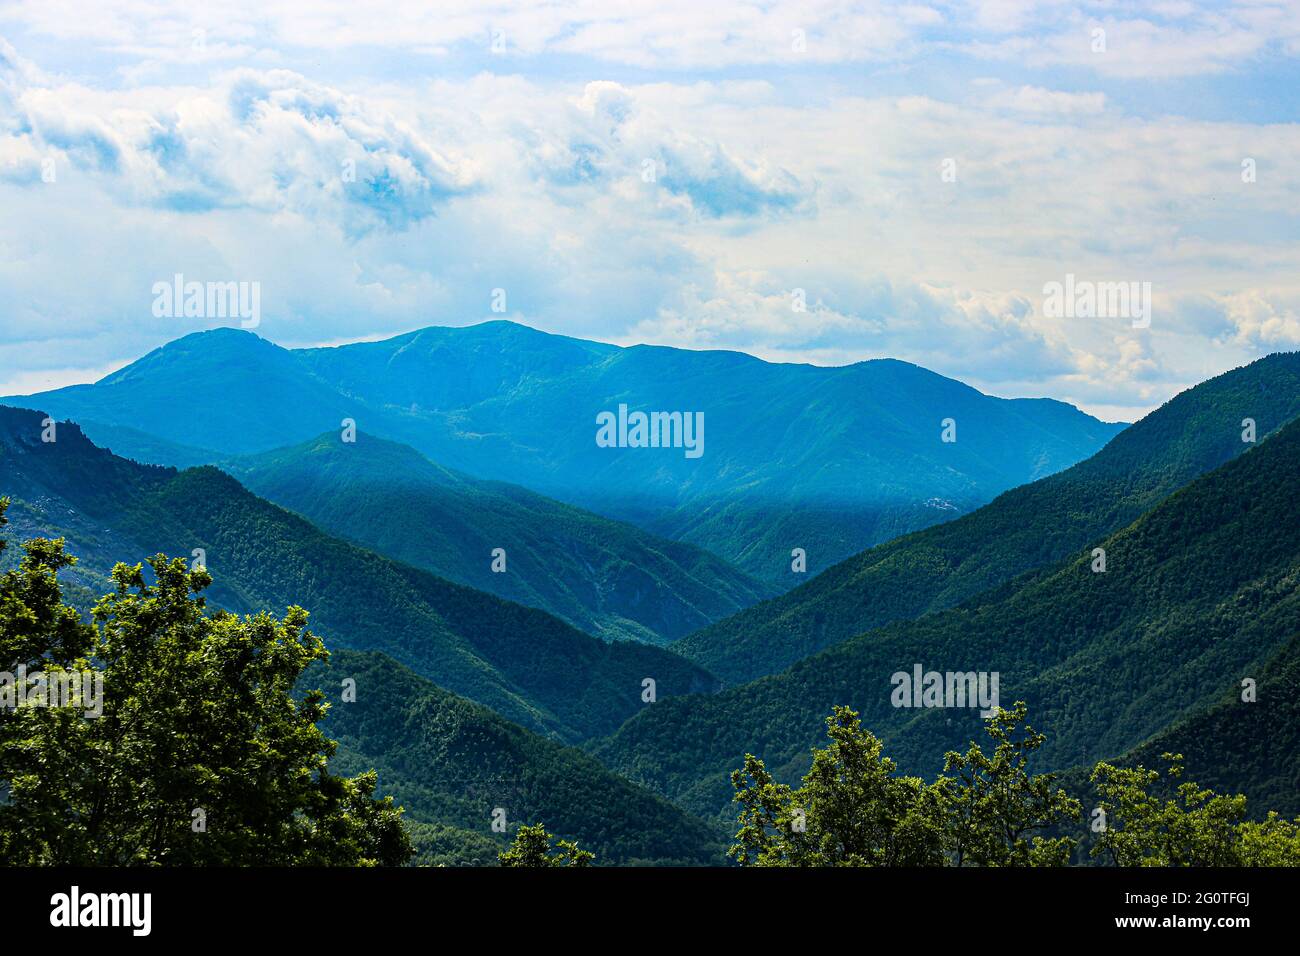 A glimpse of the beautiful Trebbia Valley in Northern Italy. Stock Photo